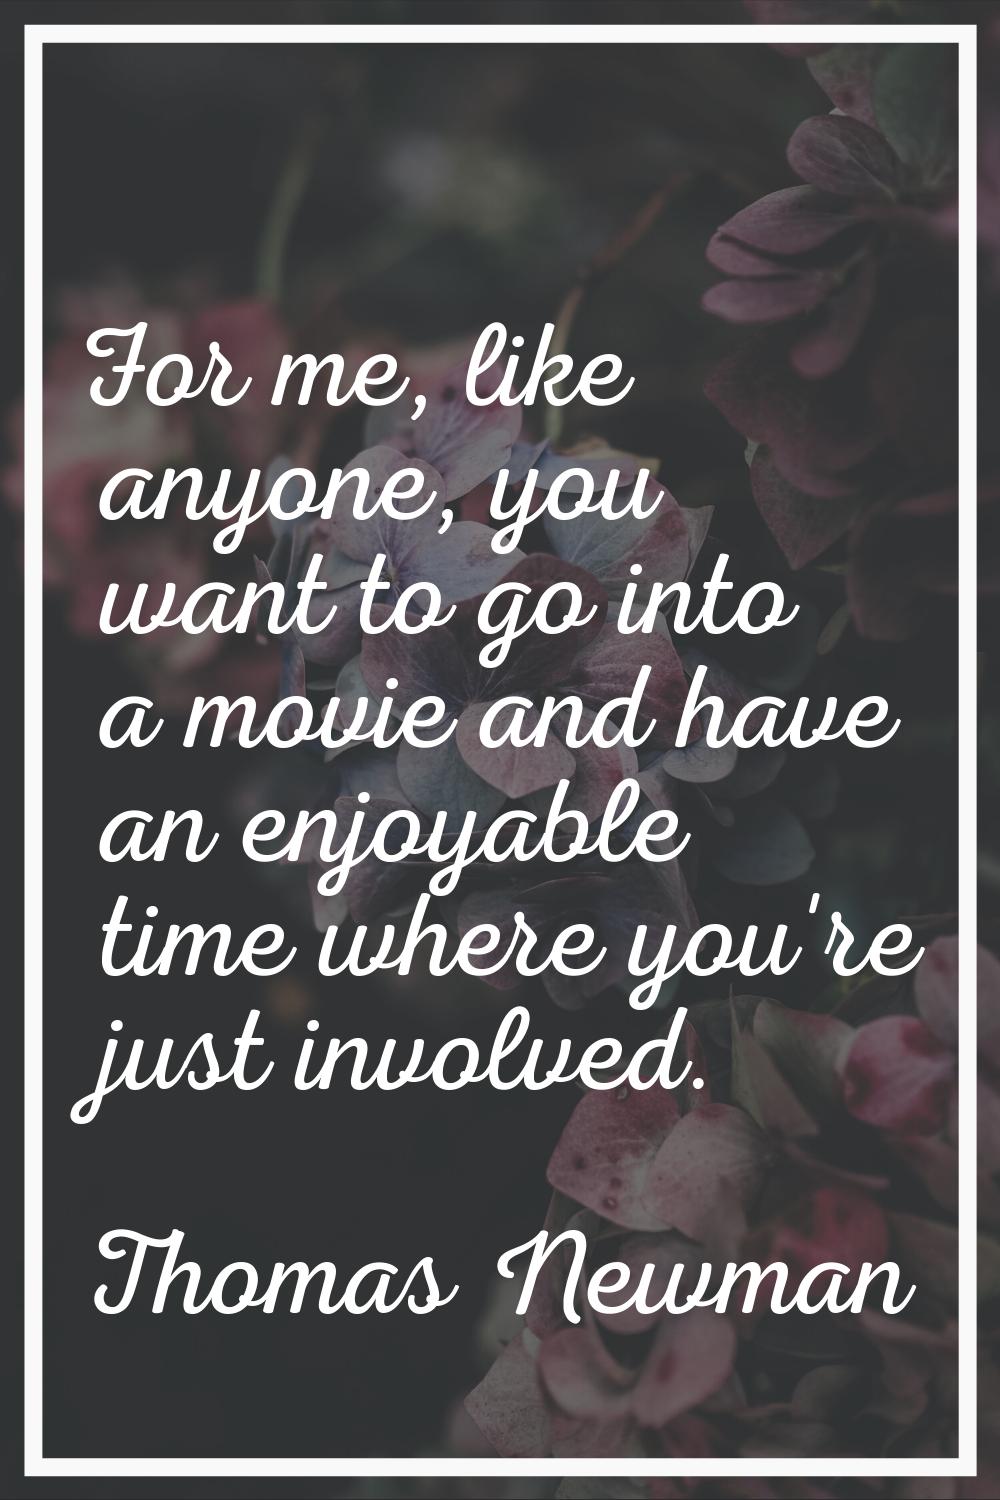 For me, like anyone, you want to go into a movie and have an enjoyable time where you're just invol